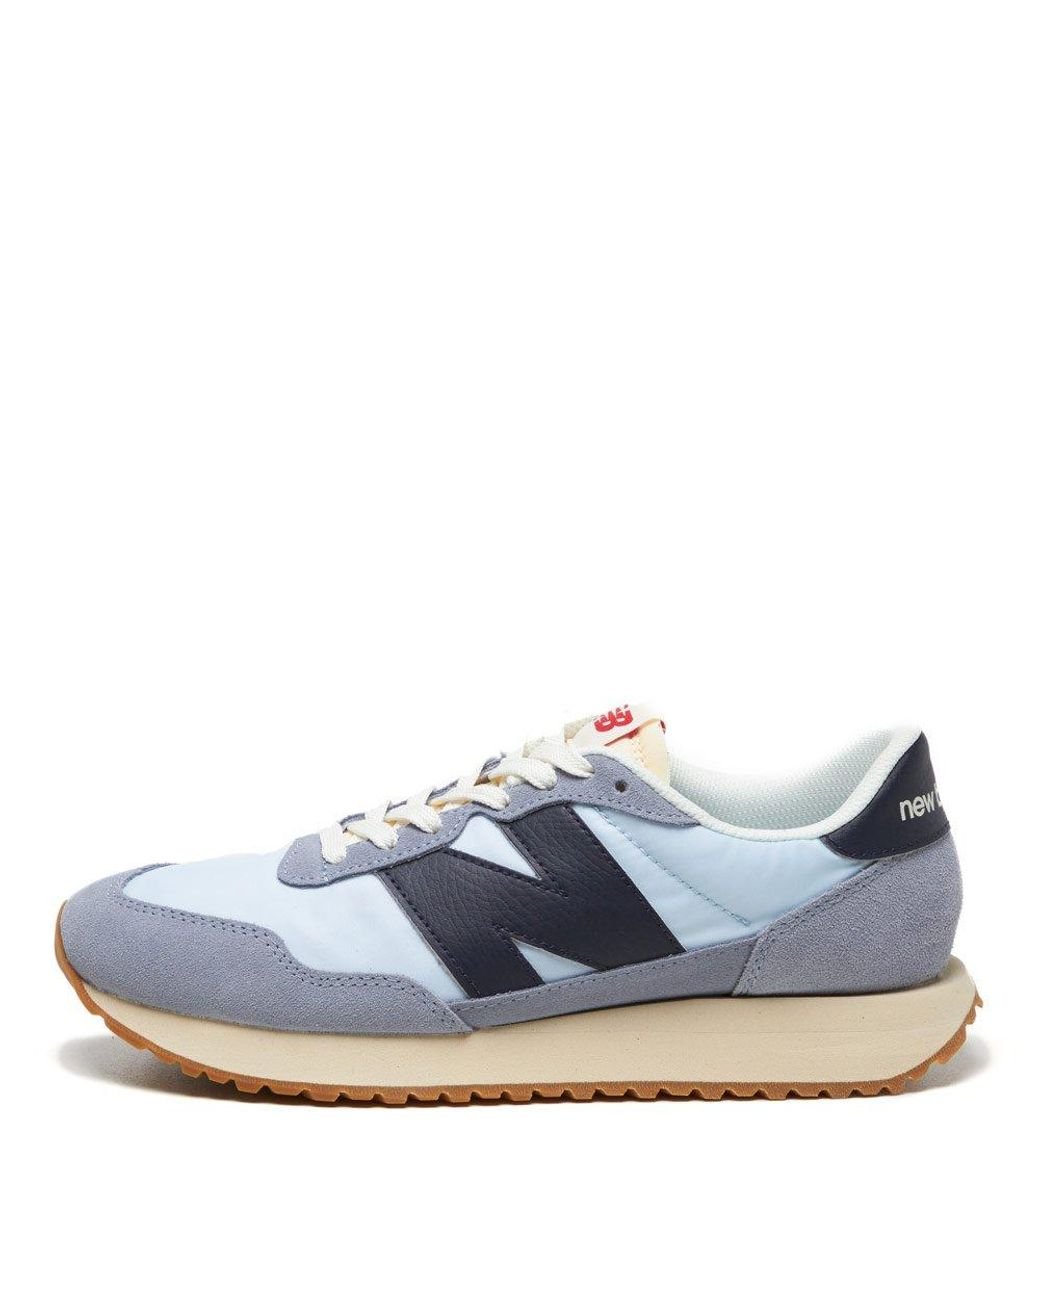 New Balance Synthetic 237 Trainers in Blue for Men - Lyst